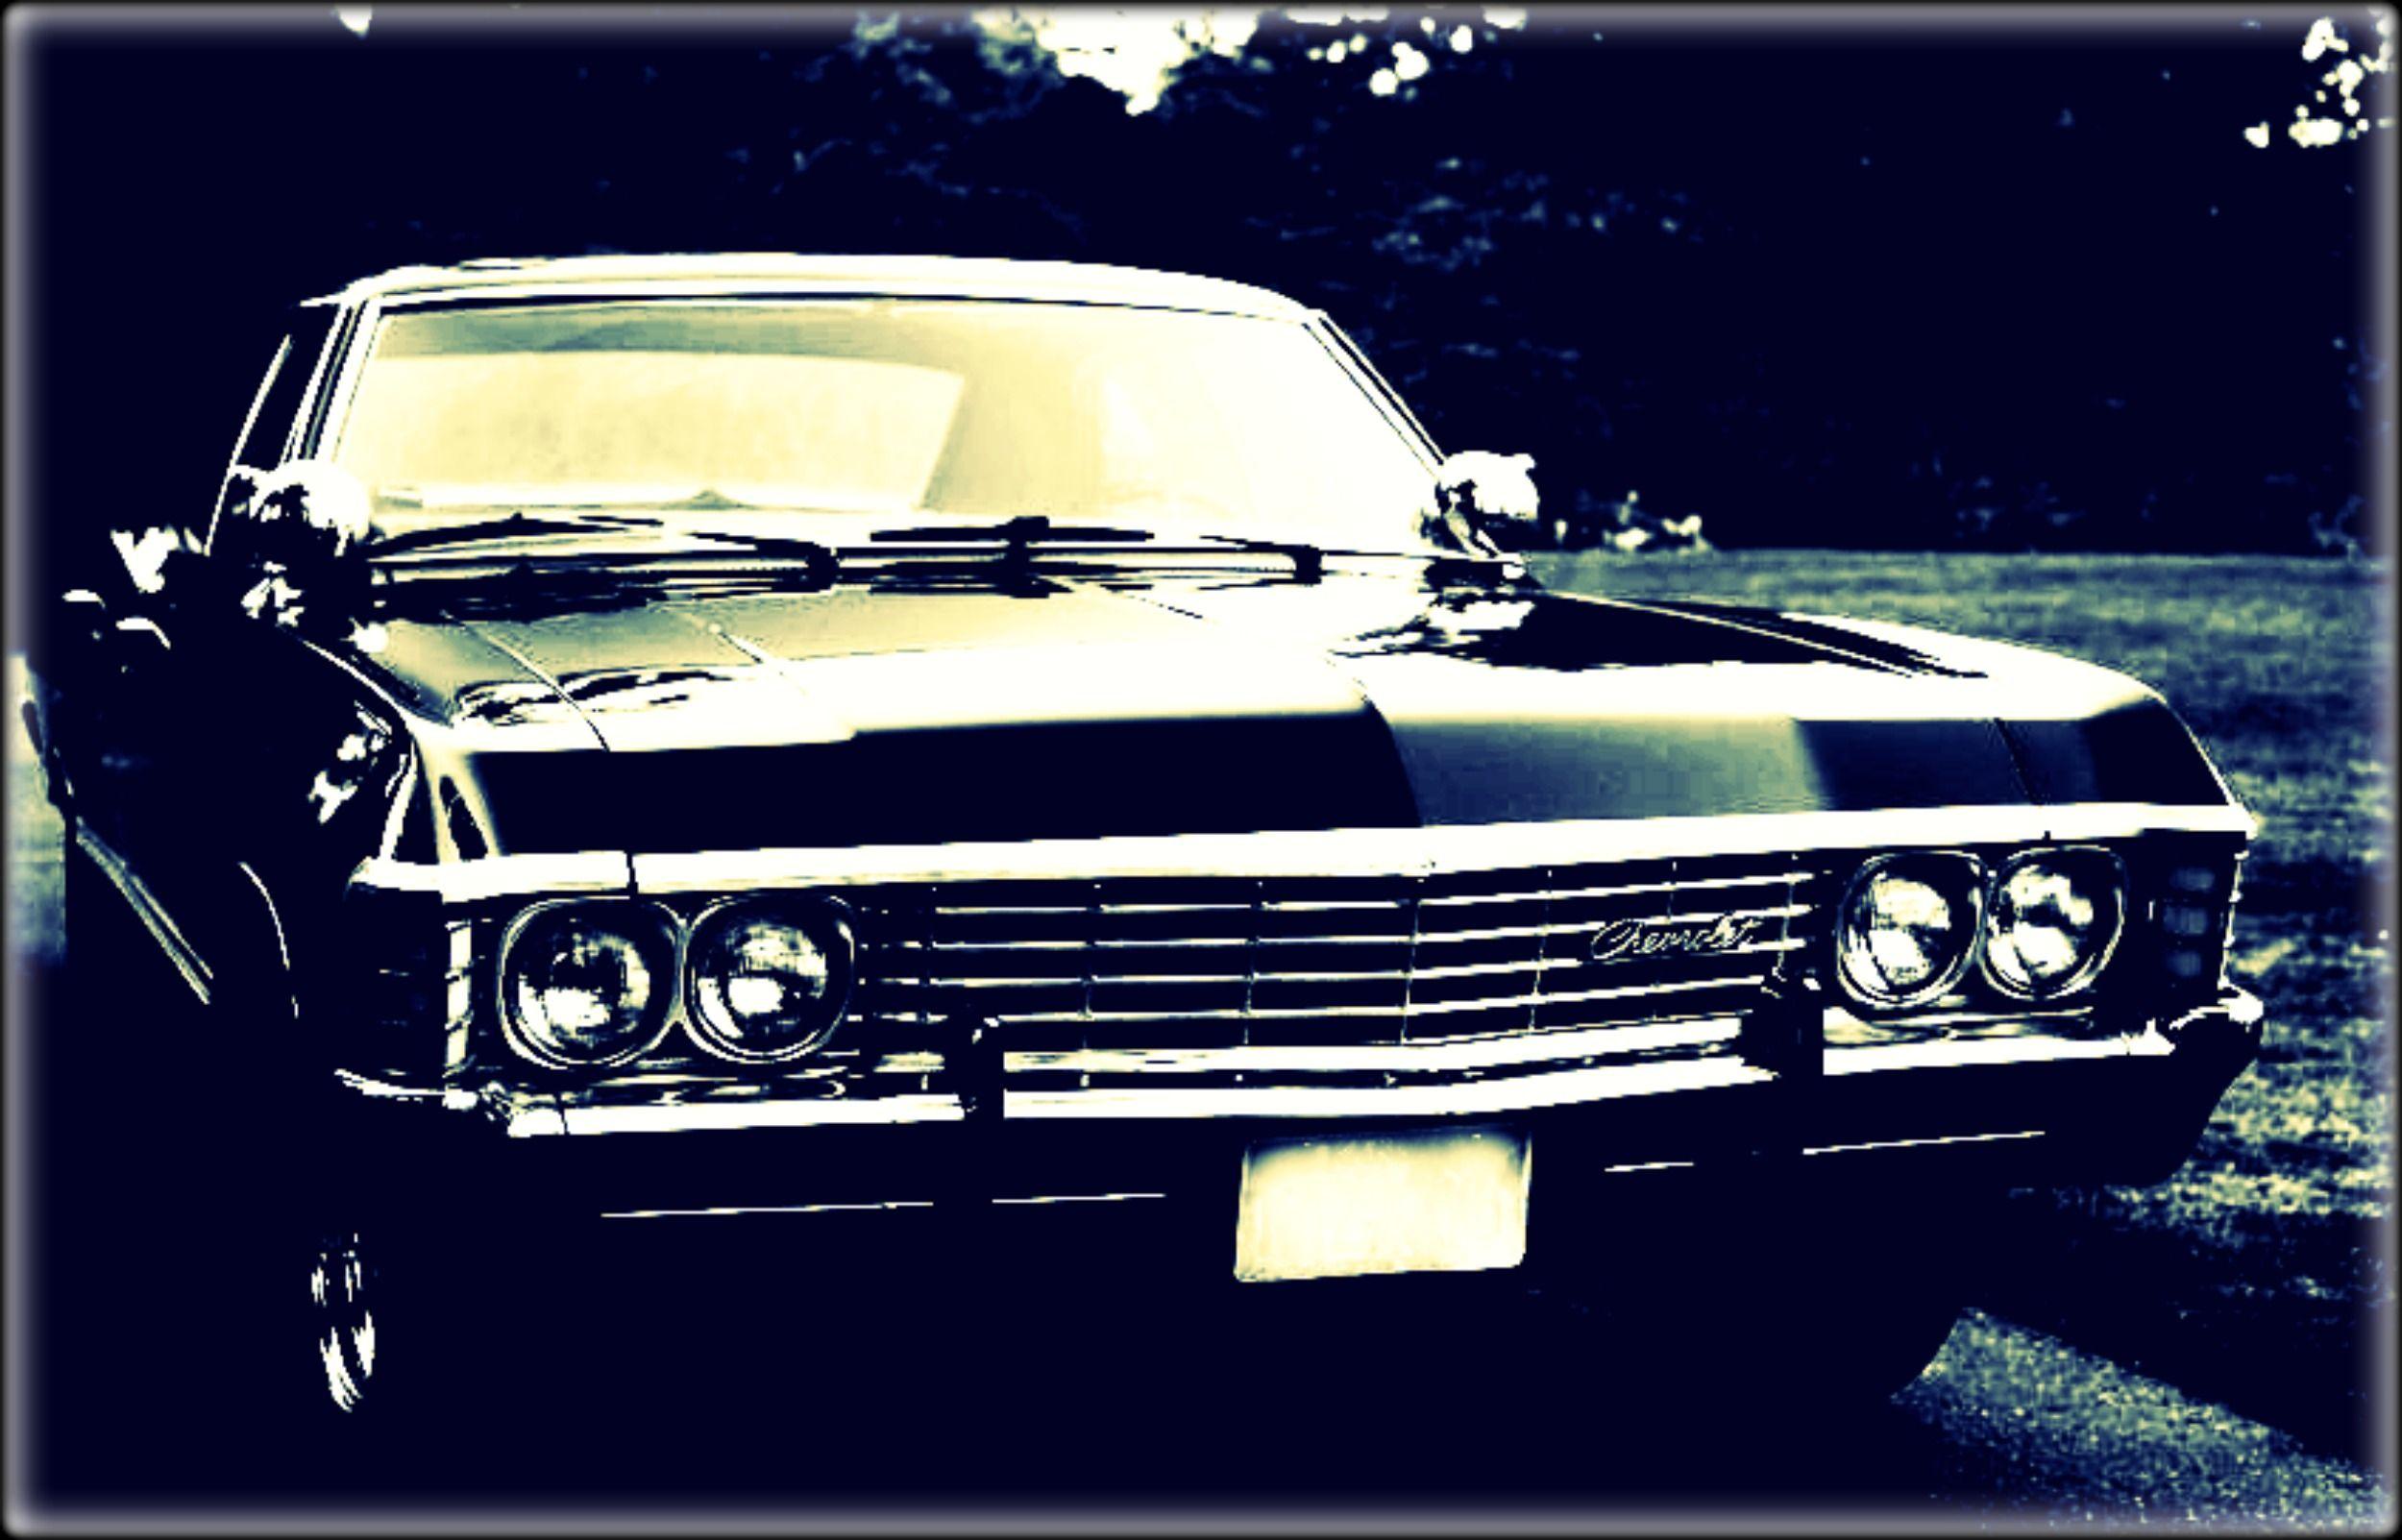 image about 67 chevy impala. Cars, Dean o